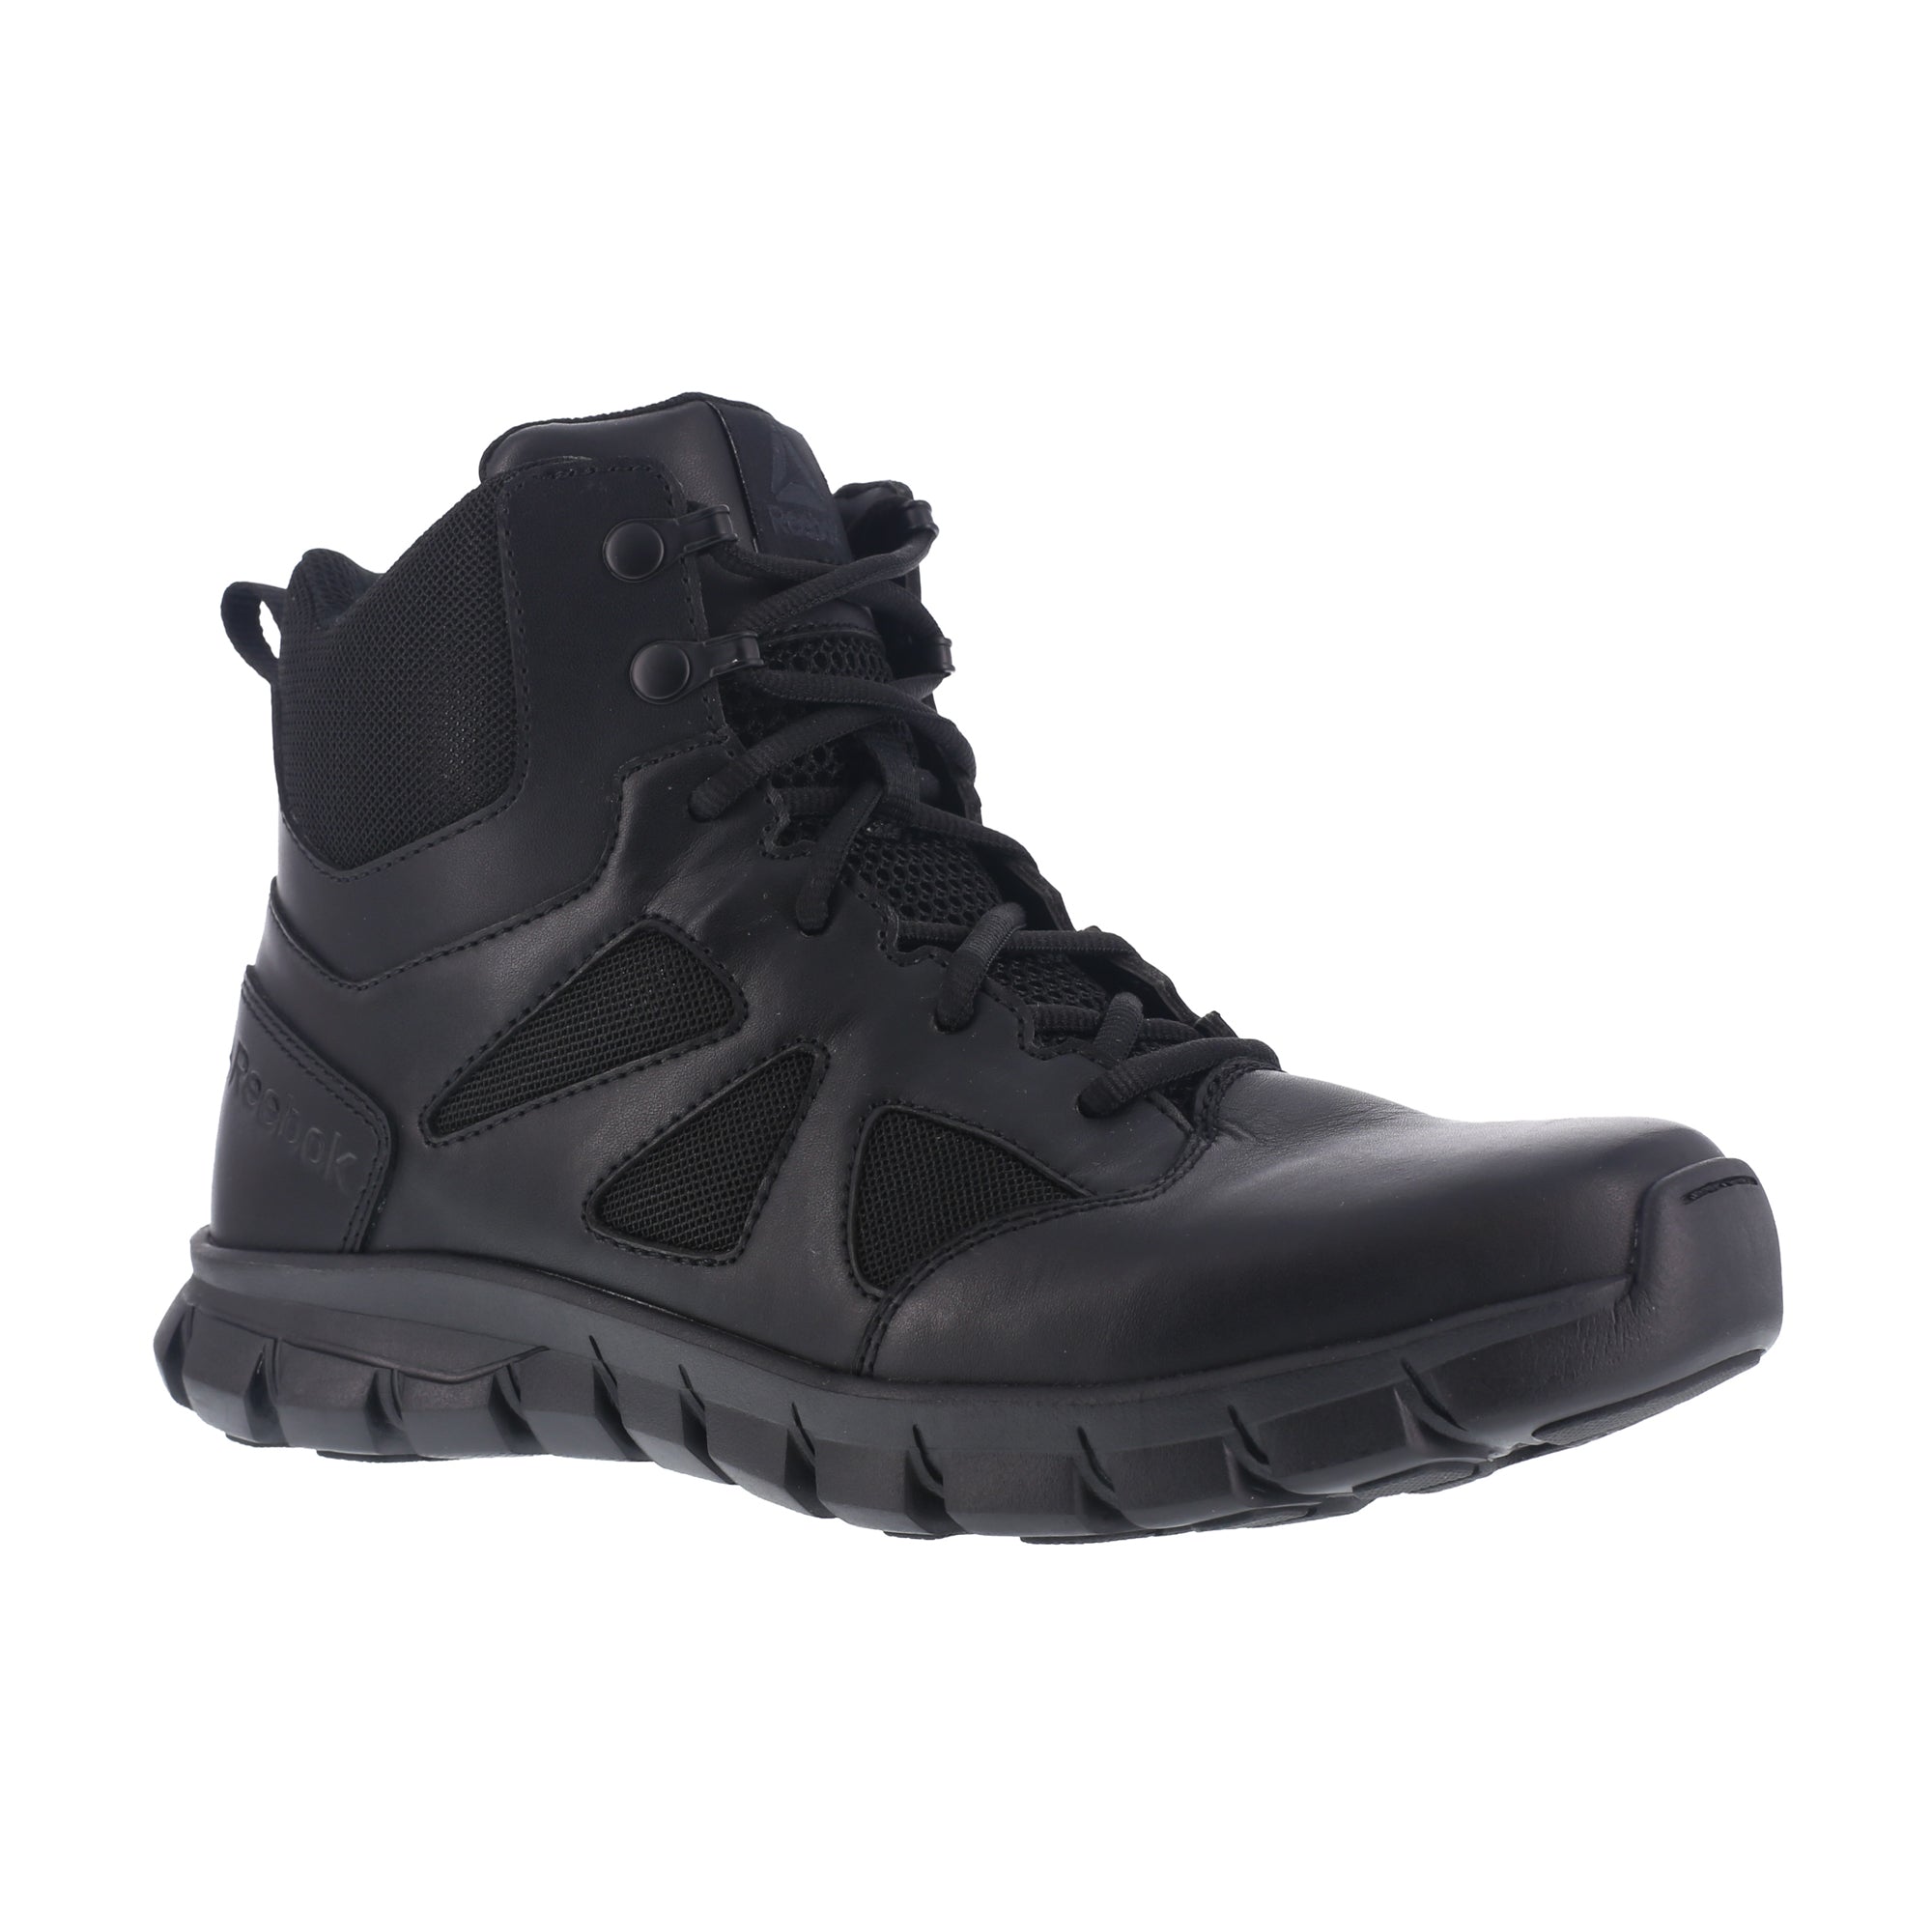 Reebok Womens Black Military Boots Sublite Tactical – The Western Company